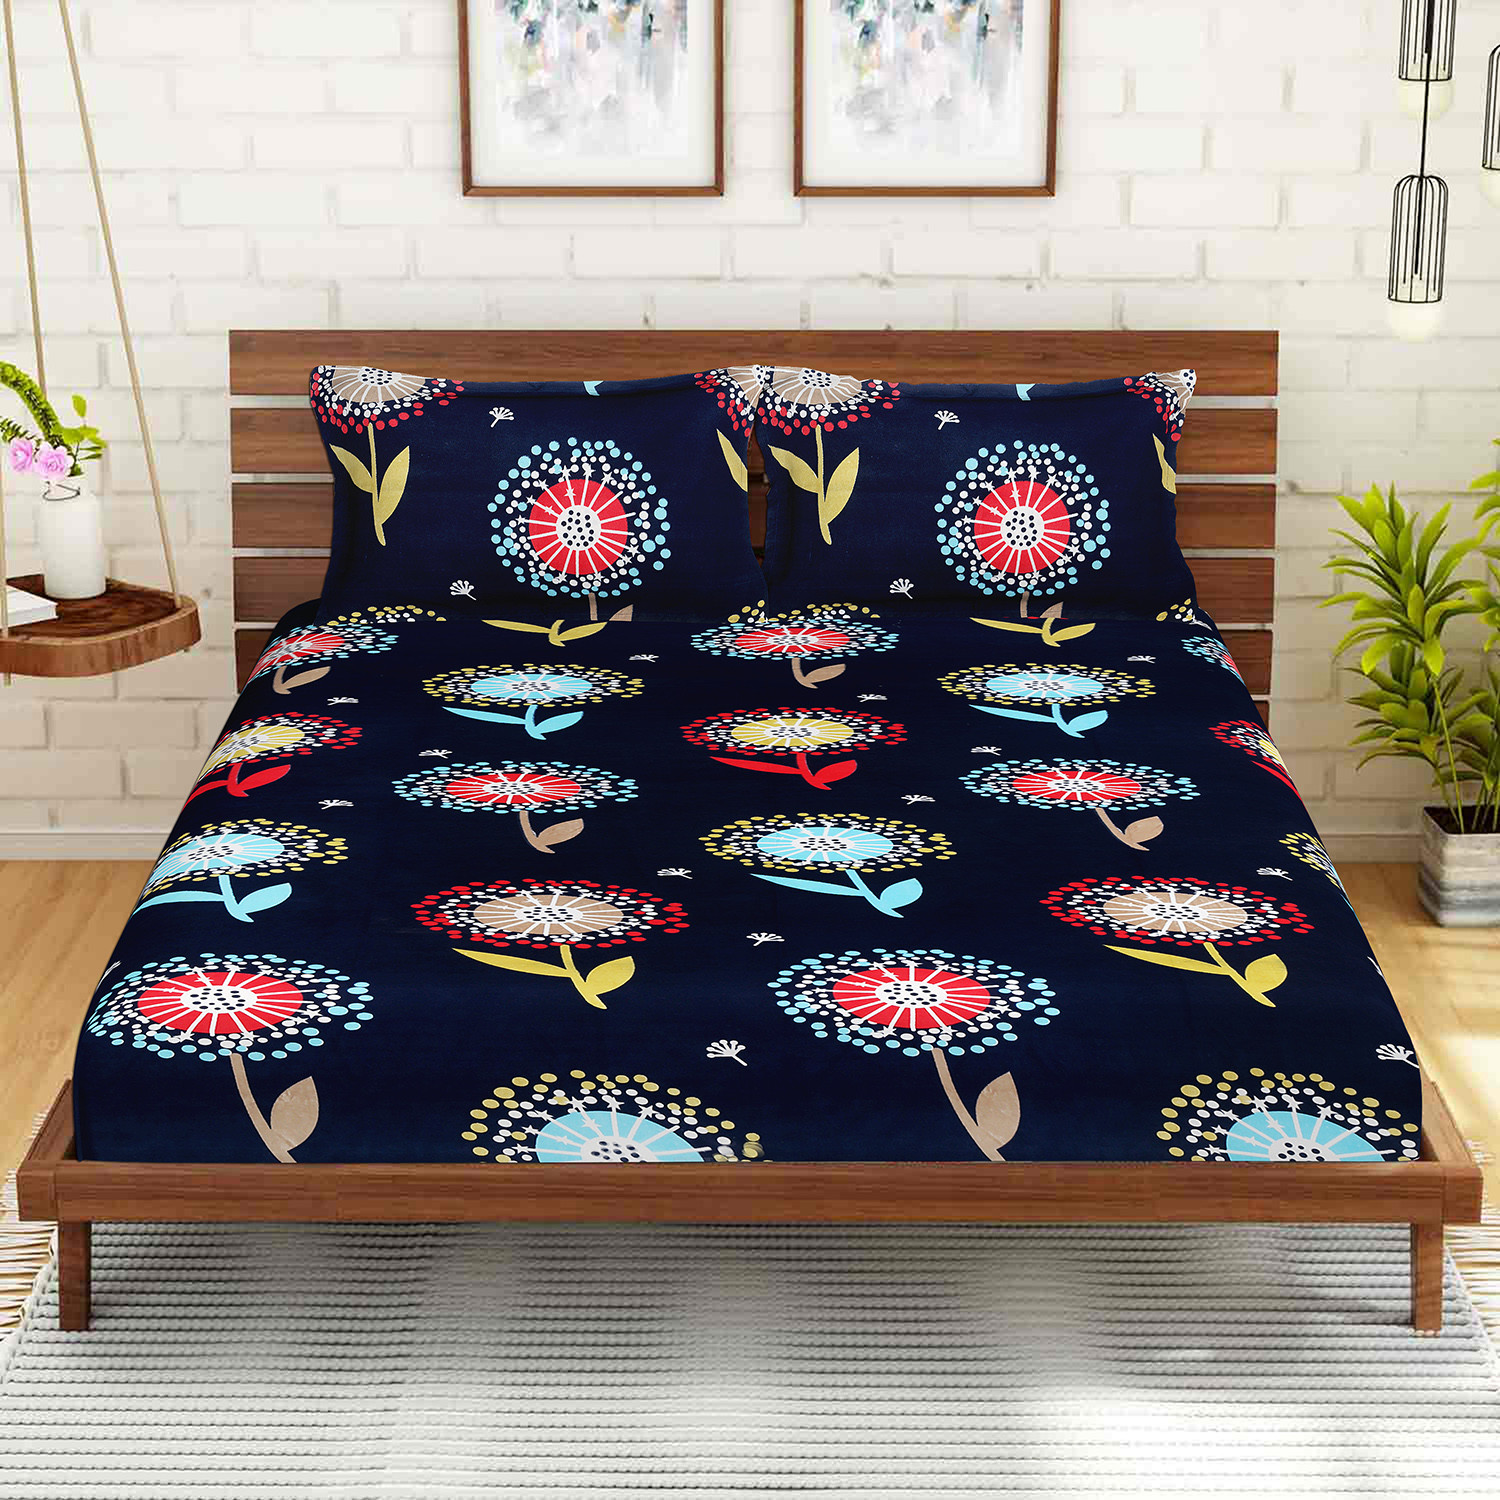 Kuber Industries Double Bedsheet|Floral Print Premium Glace Cotton Breathable Bedsheet With Two Pillow Covers,90